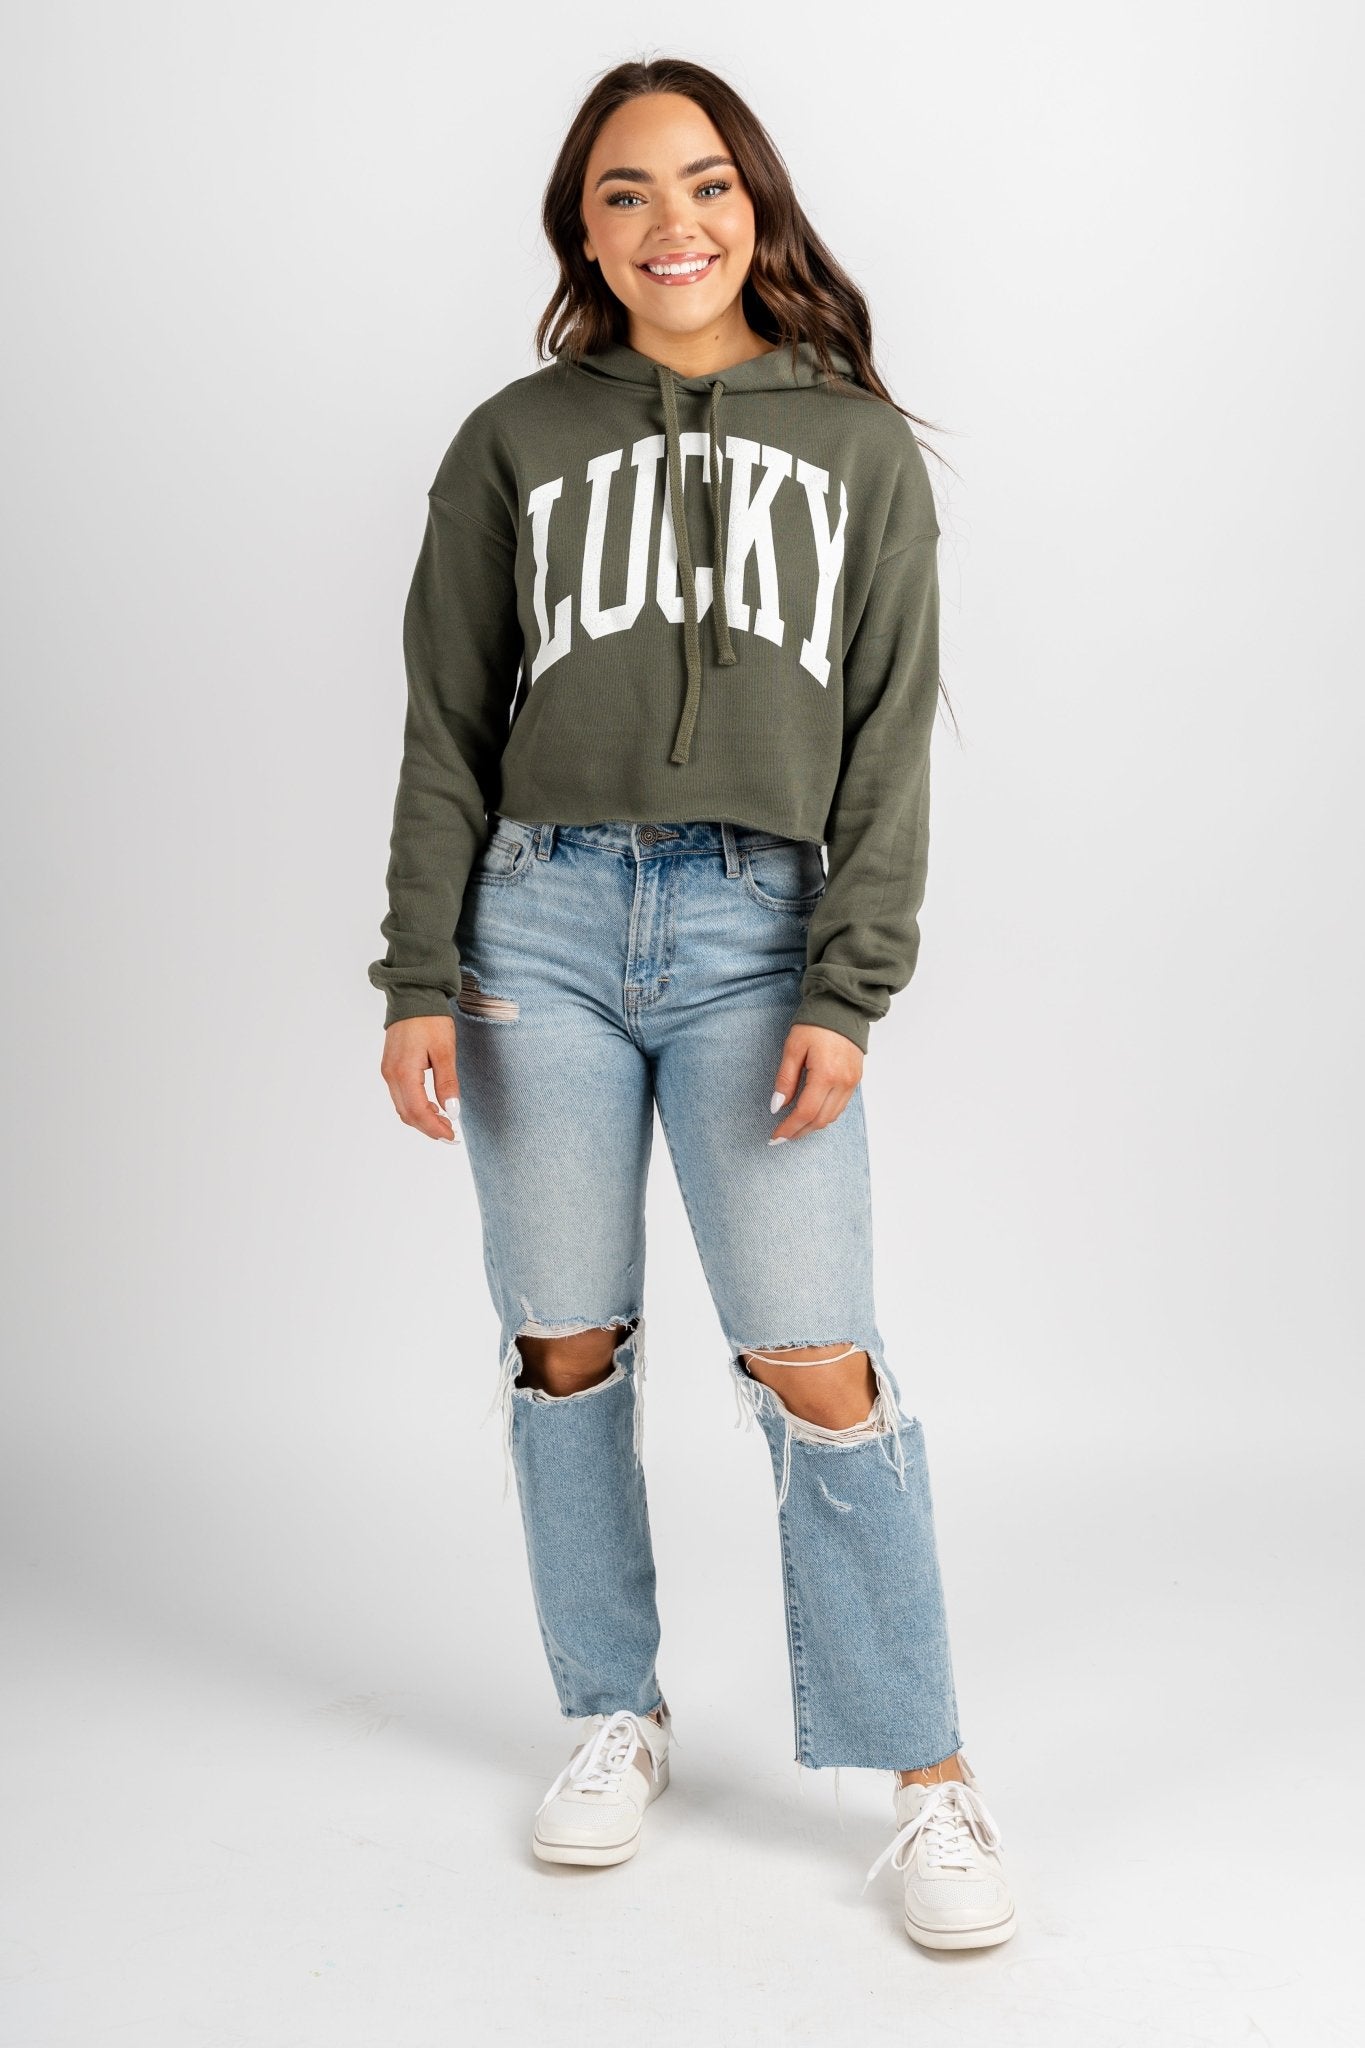 Lucky XL crop hoodie army green - Cute St. Patrick's Day Outfits at Lush Fashion Lounge Boutique in Oklahoma City